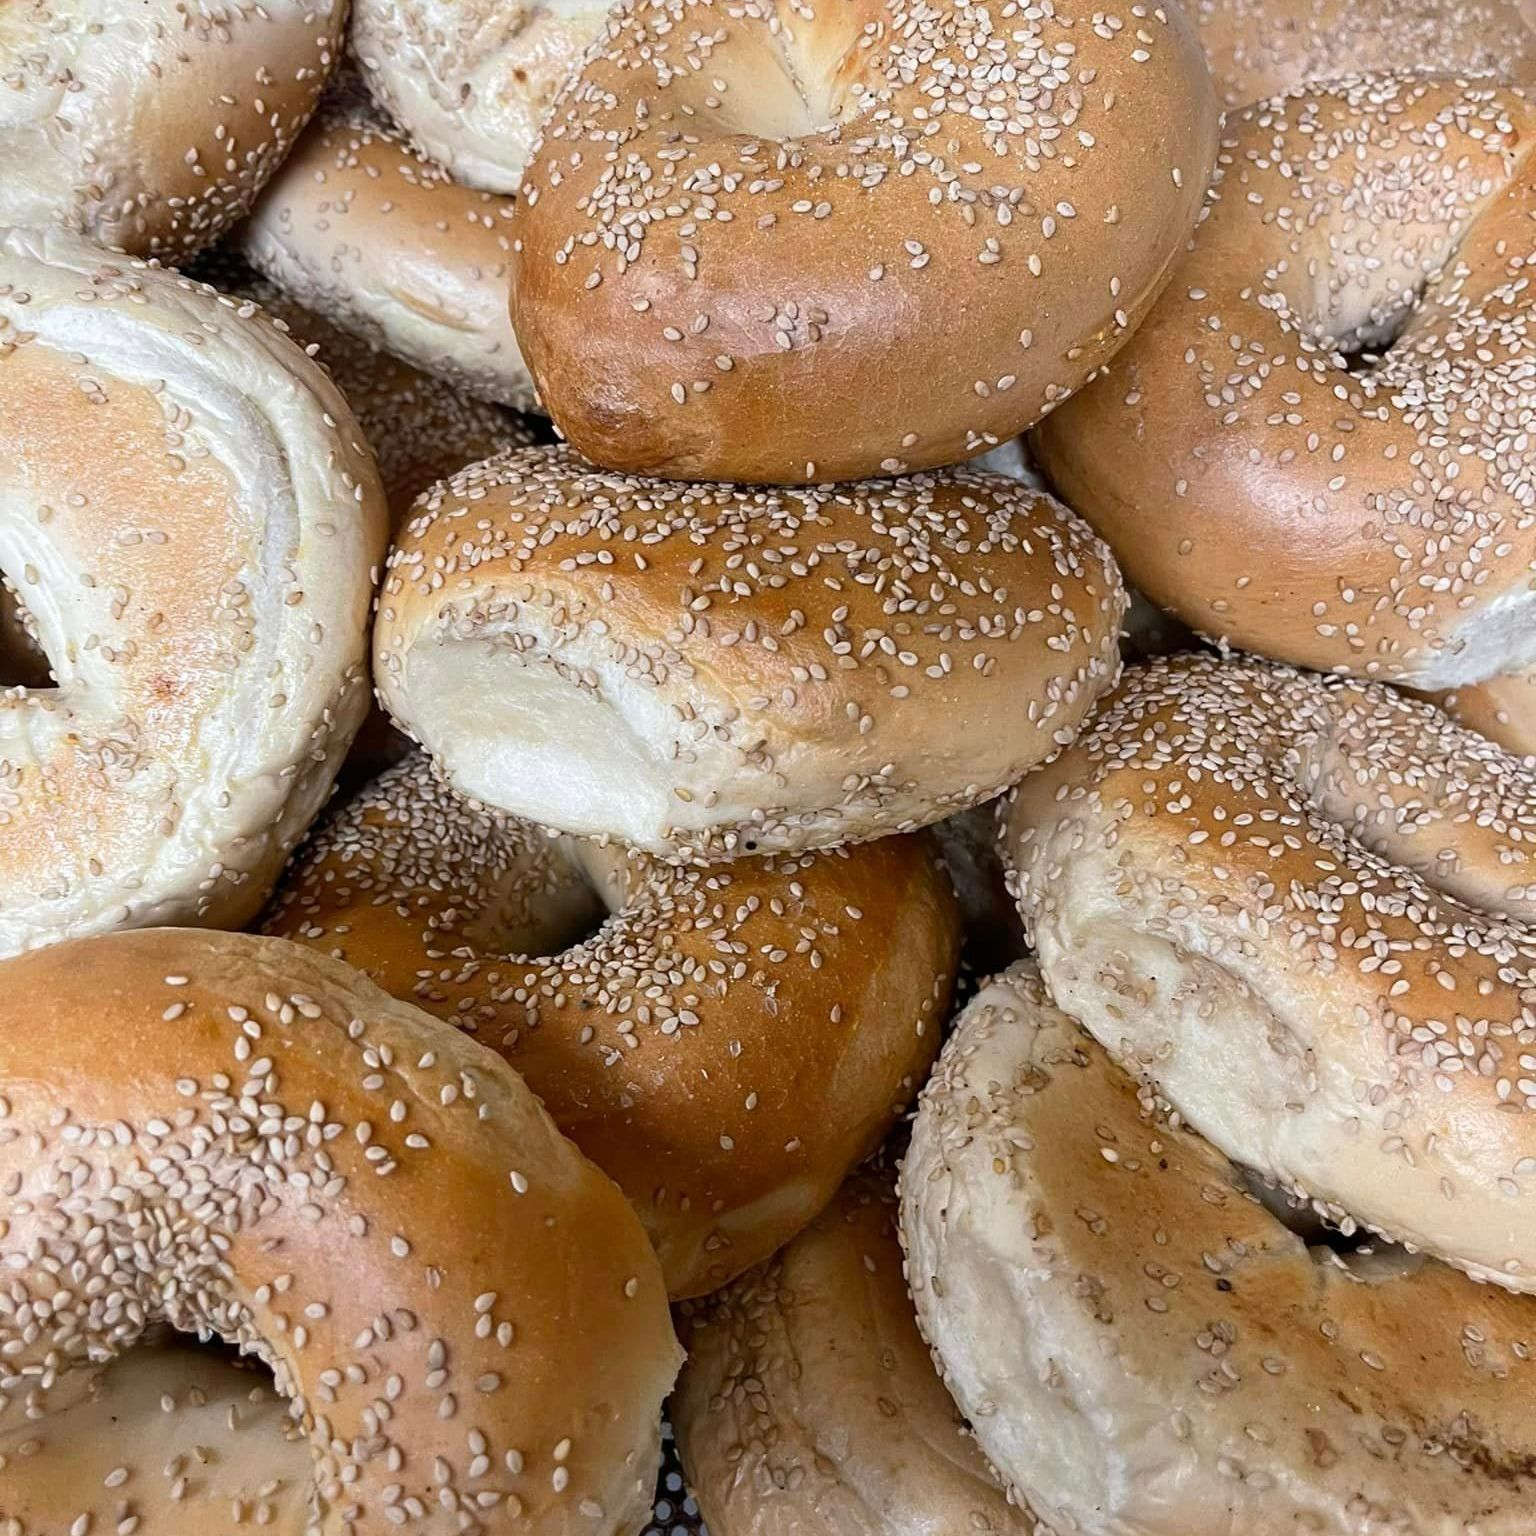 A Pile Of Bagels With Sesame Seeds On Them - Mahopac, NY - Our Town Bagels & Bakery